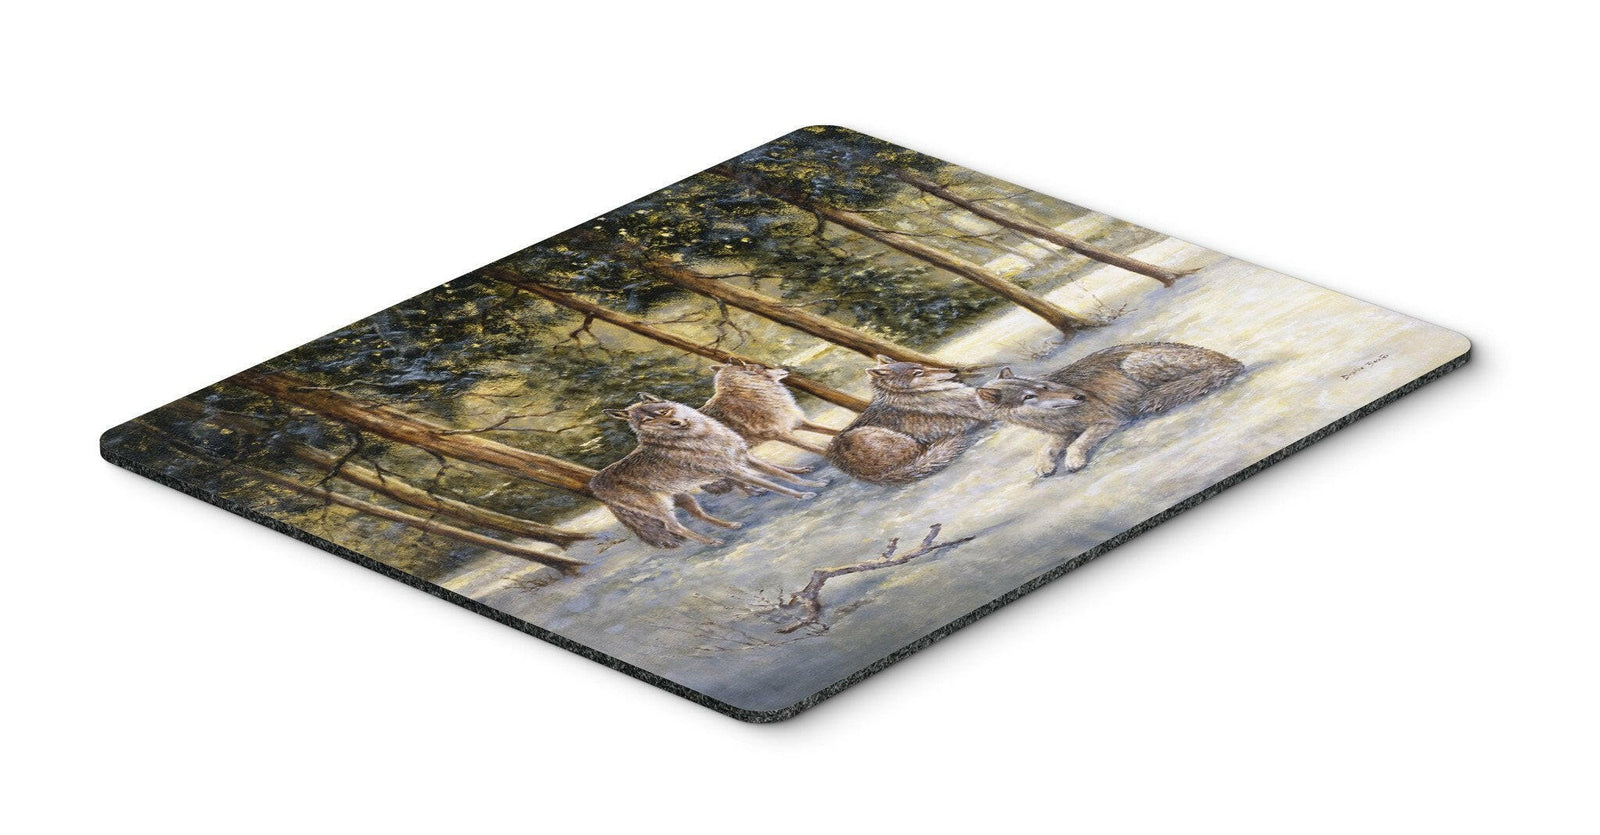 Wolves by Daphne Baxter Mouse Pad, Hot Pad or Trivet BDBA0371MP by Caroline's Treasures